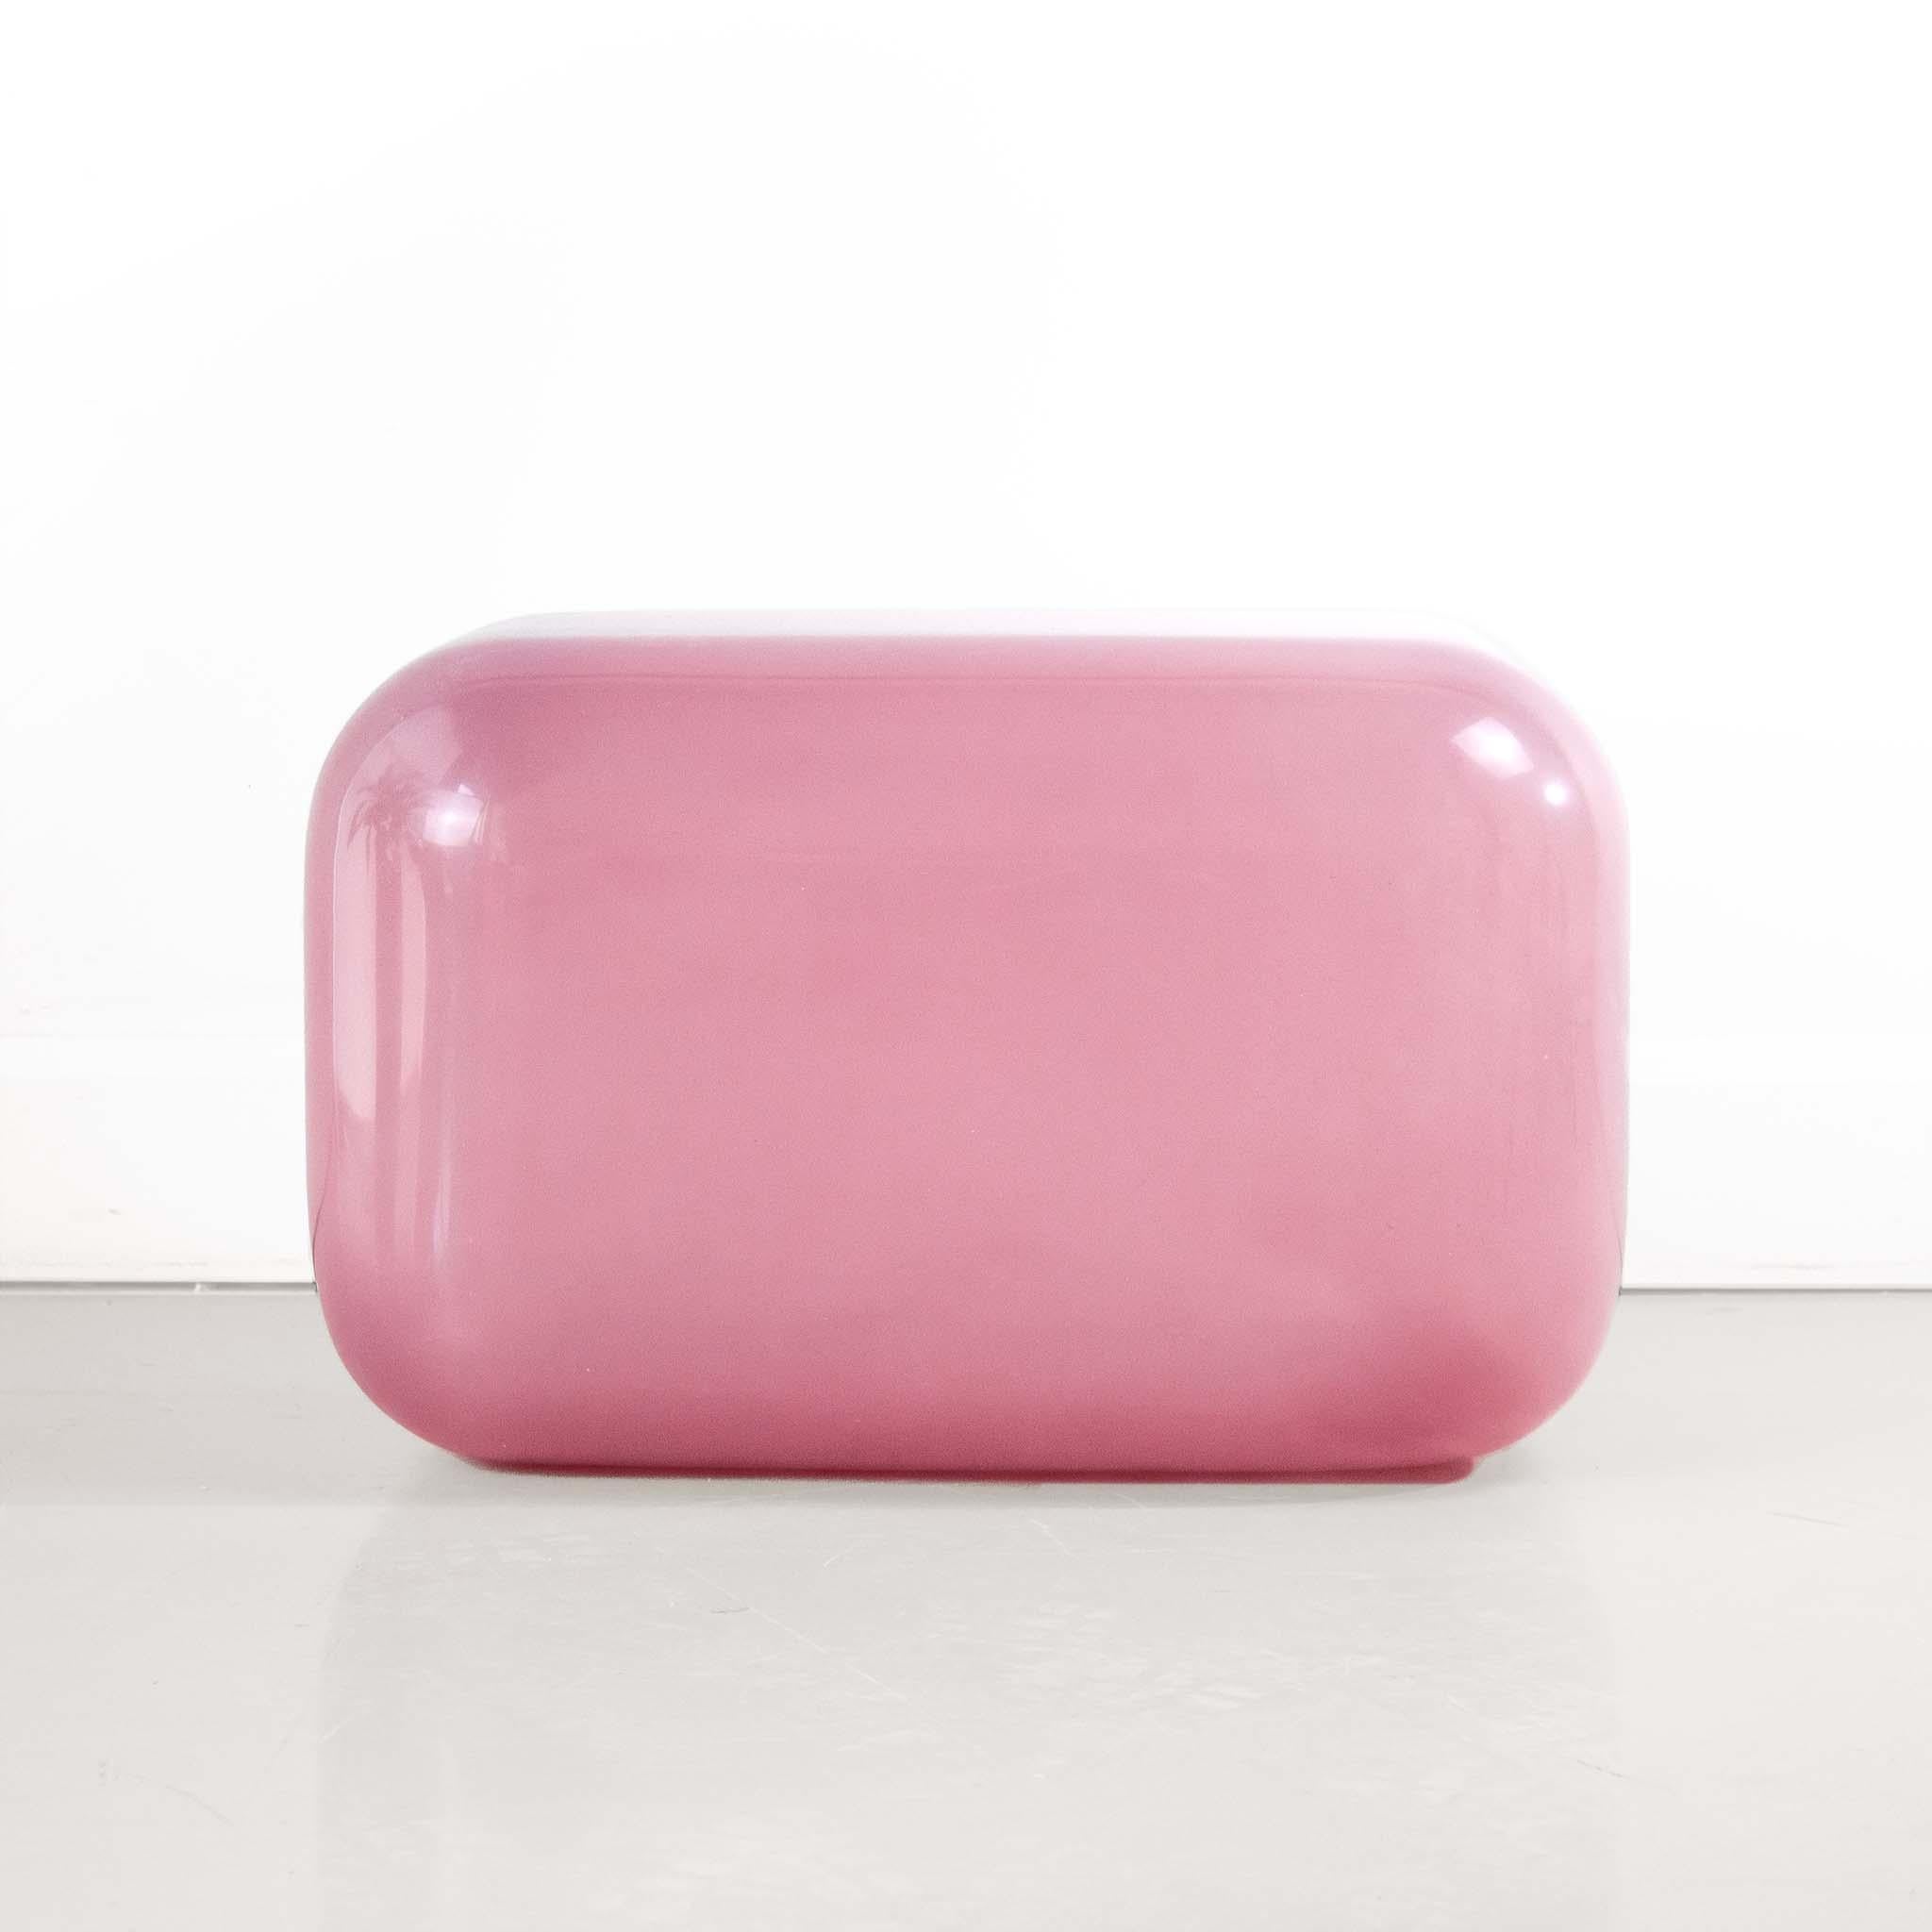 Bubblegum Oort resin side table by creators of objects
Materials: Resin, pigment
DImensions: W 56 x D 36 x H 36 cm
Also Available: Tourmaline, Bordeaux, Spice, Ochre, Forest, Ocean, Twilight, Rock, Lilac, Cerise, Coral Spice, Honey, Moss, Surf,